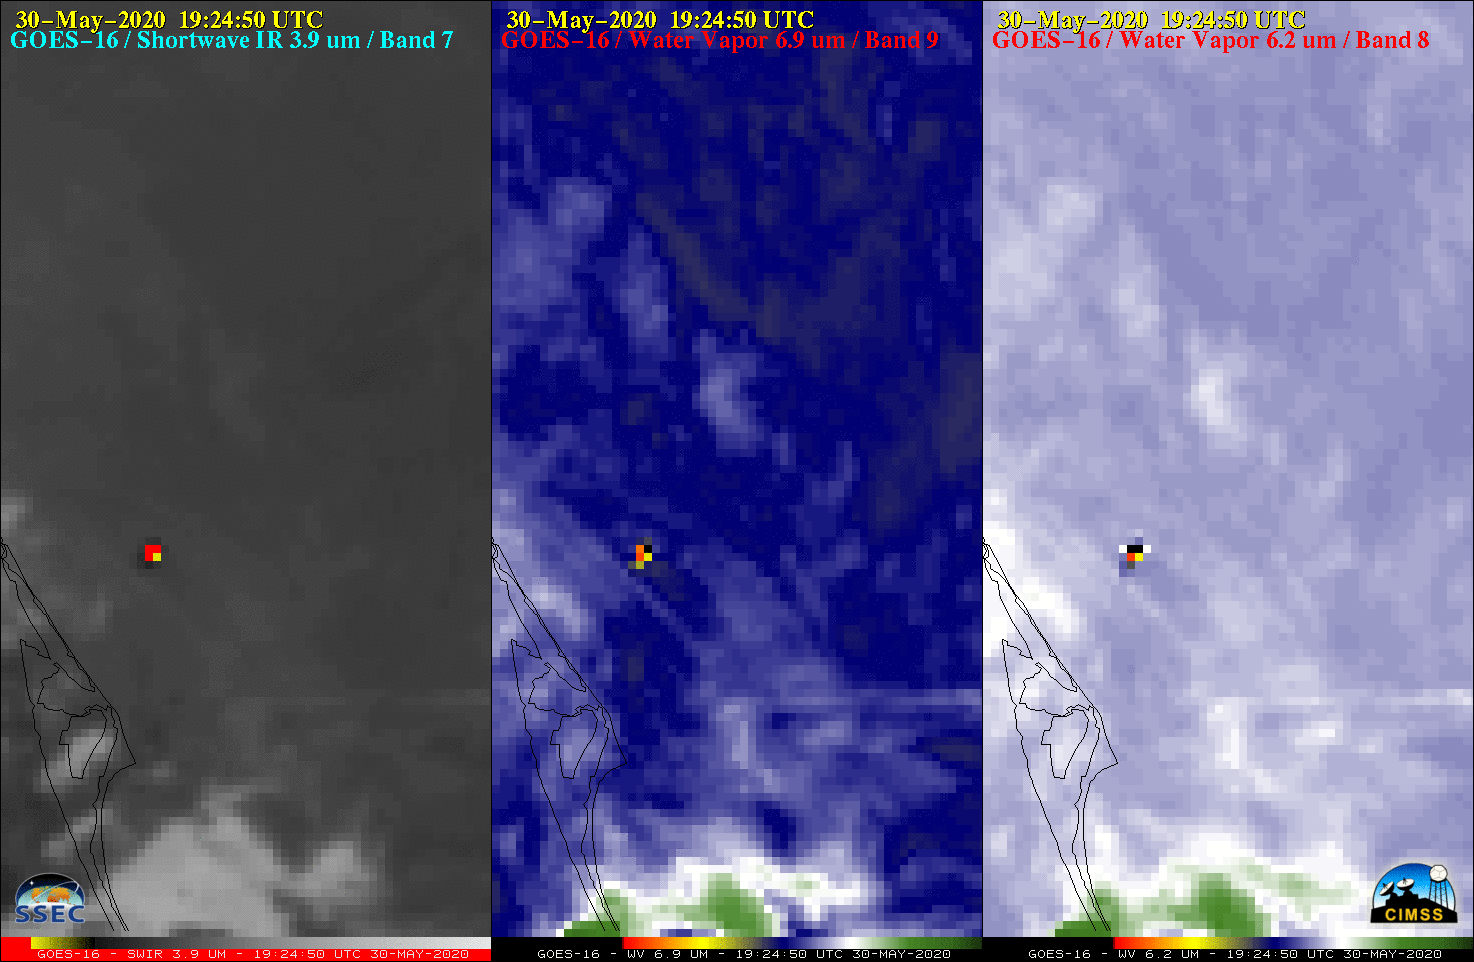 GOES-16 Shortwave Infrared (3.9 µm, left), Mid-level Water Vapor (6.9 µm, center) and Upper-level Water Vapor (6.2 µm, left) images [click to play animation | MP4]